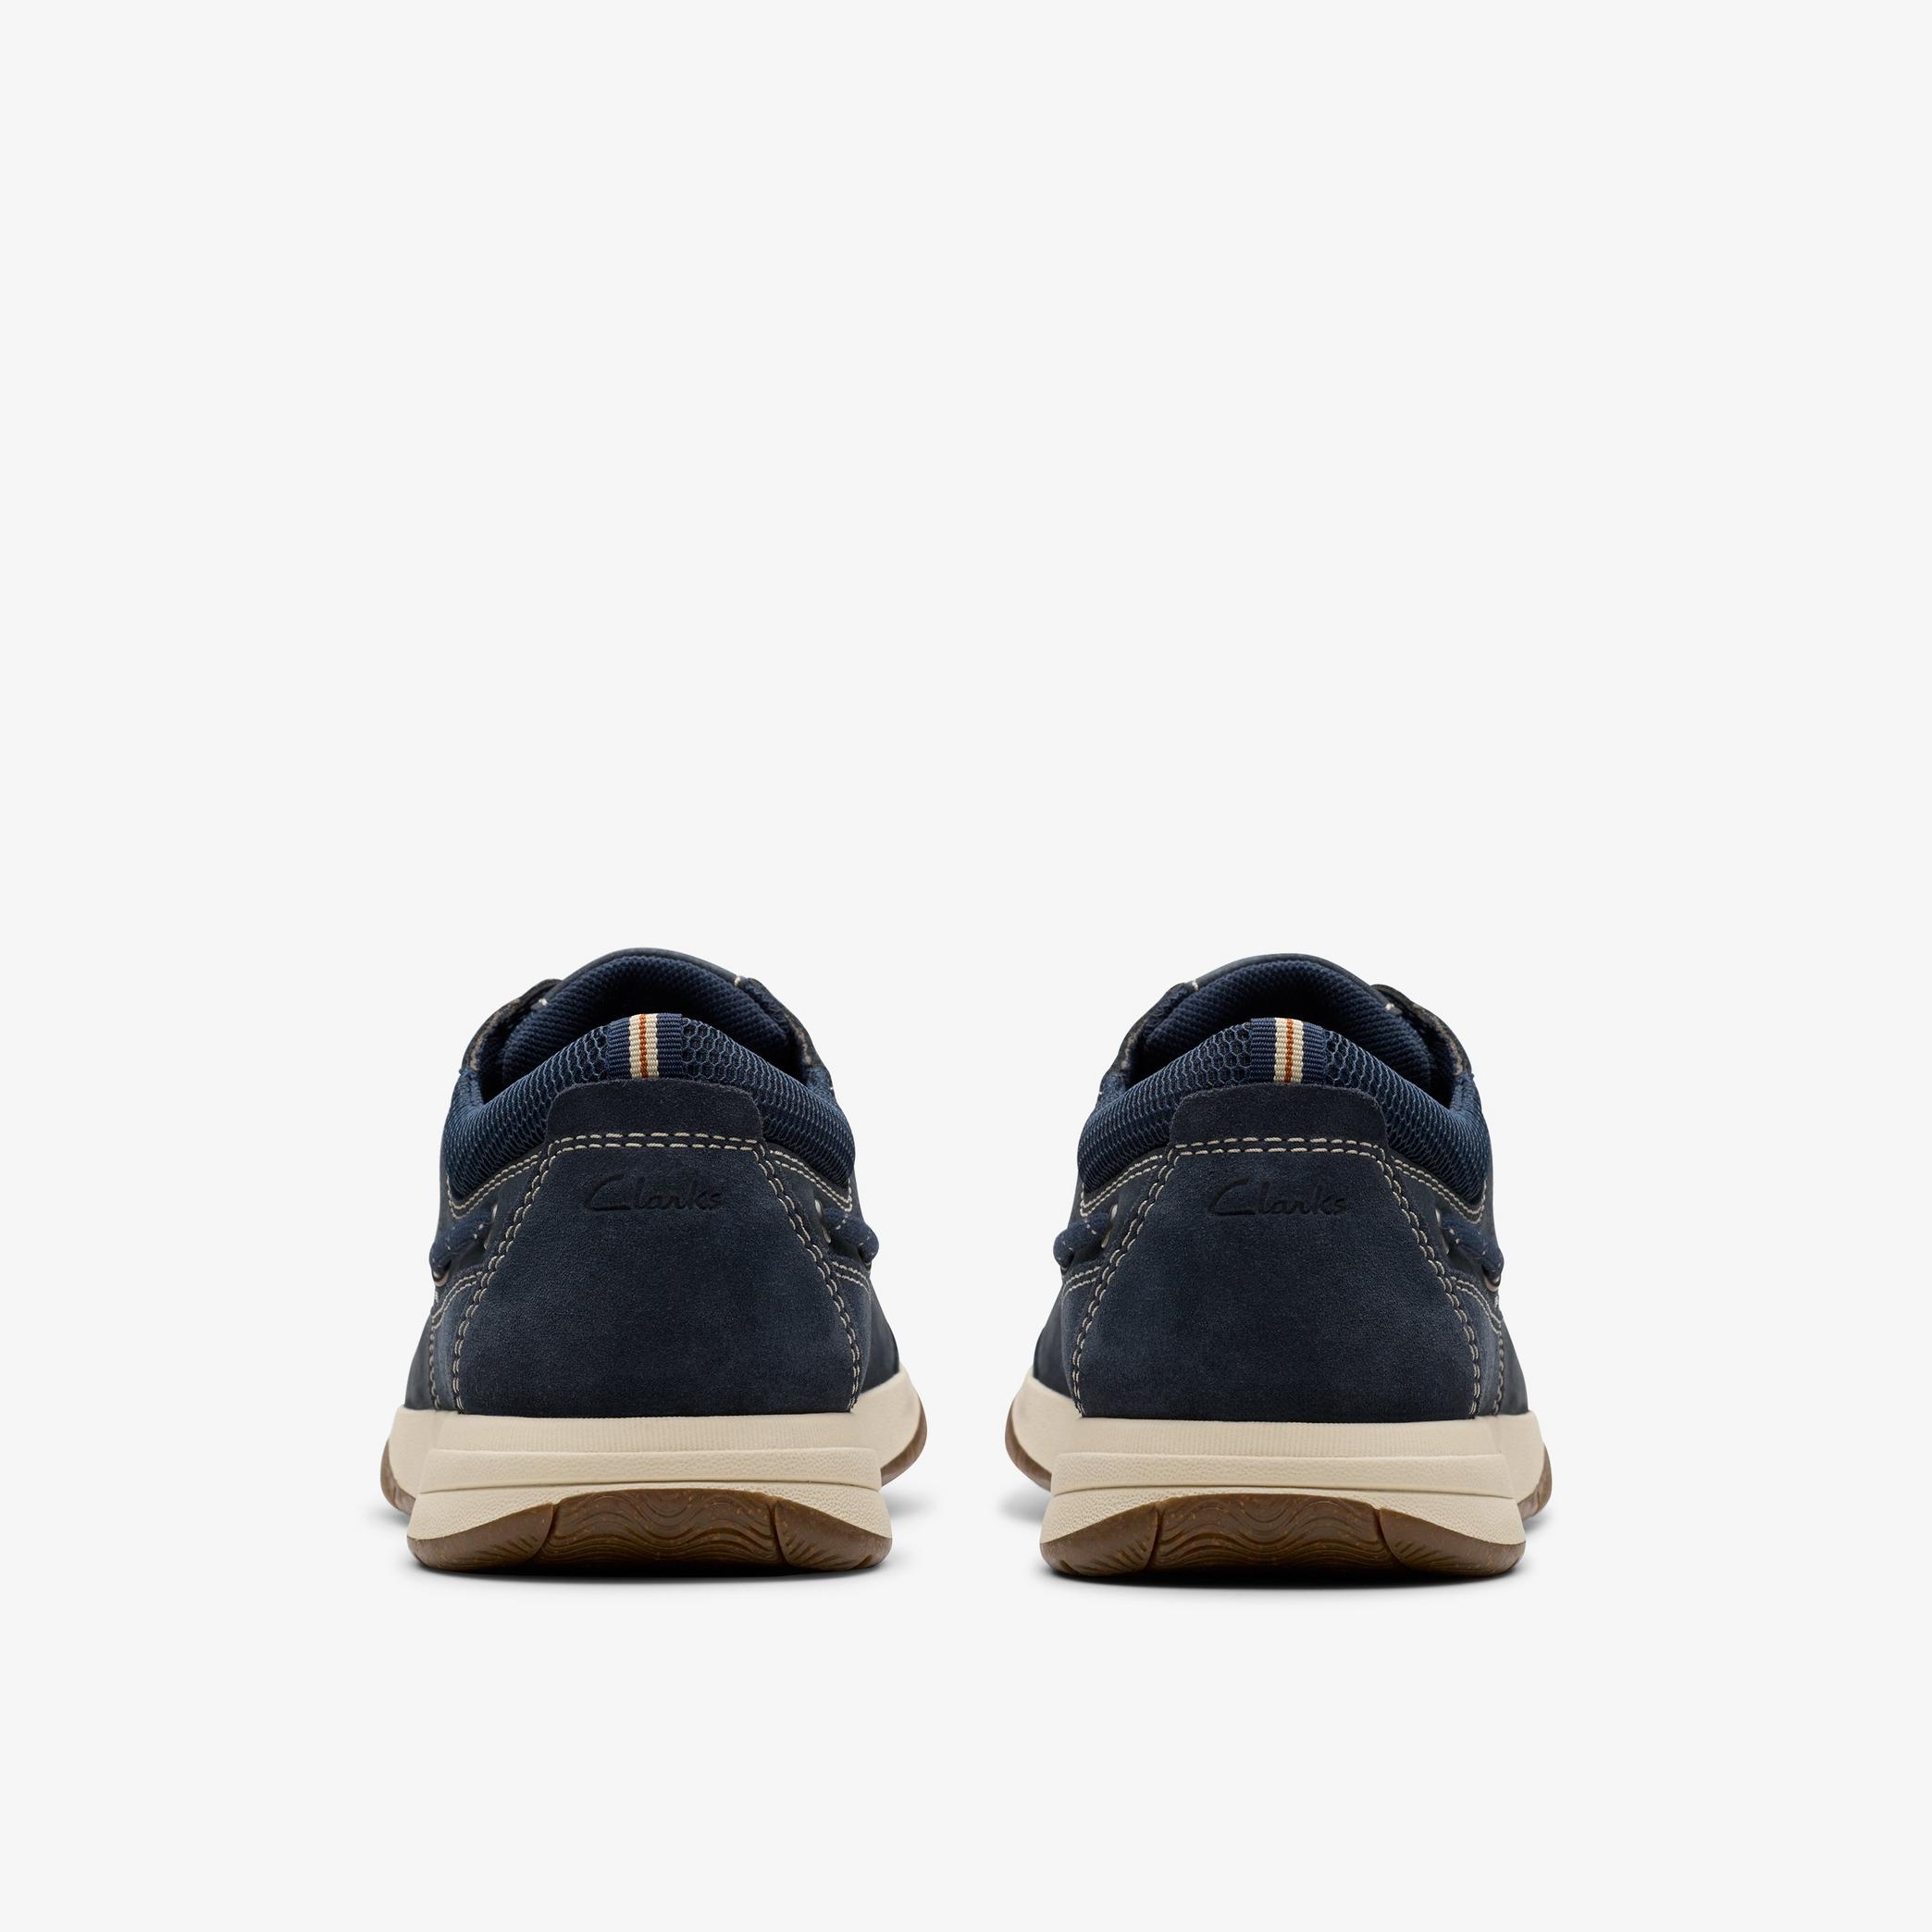 Sailview Lace Navy Nubuck Boat Shoes, view 5 of 6